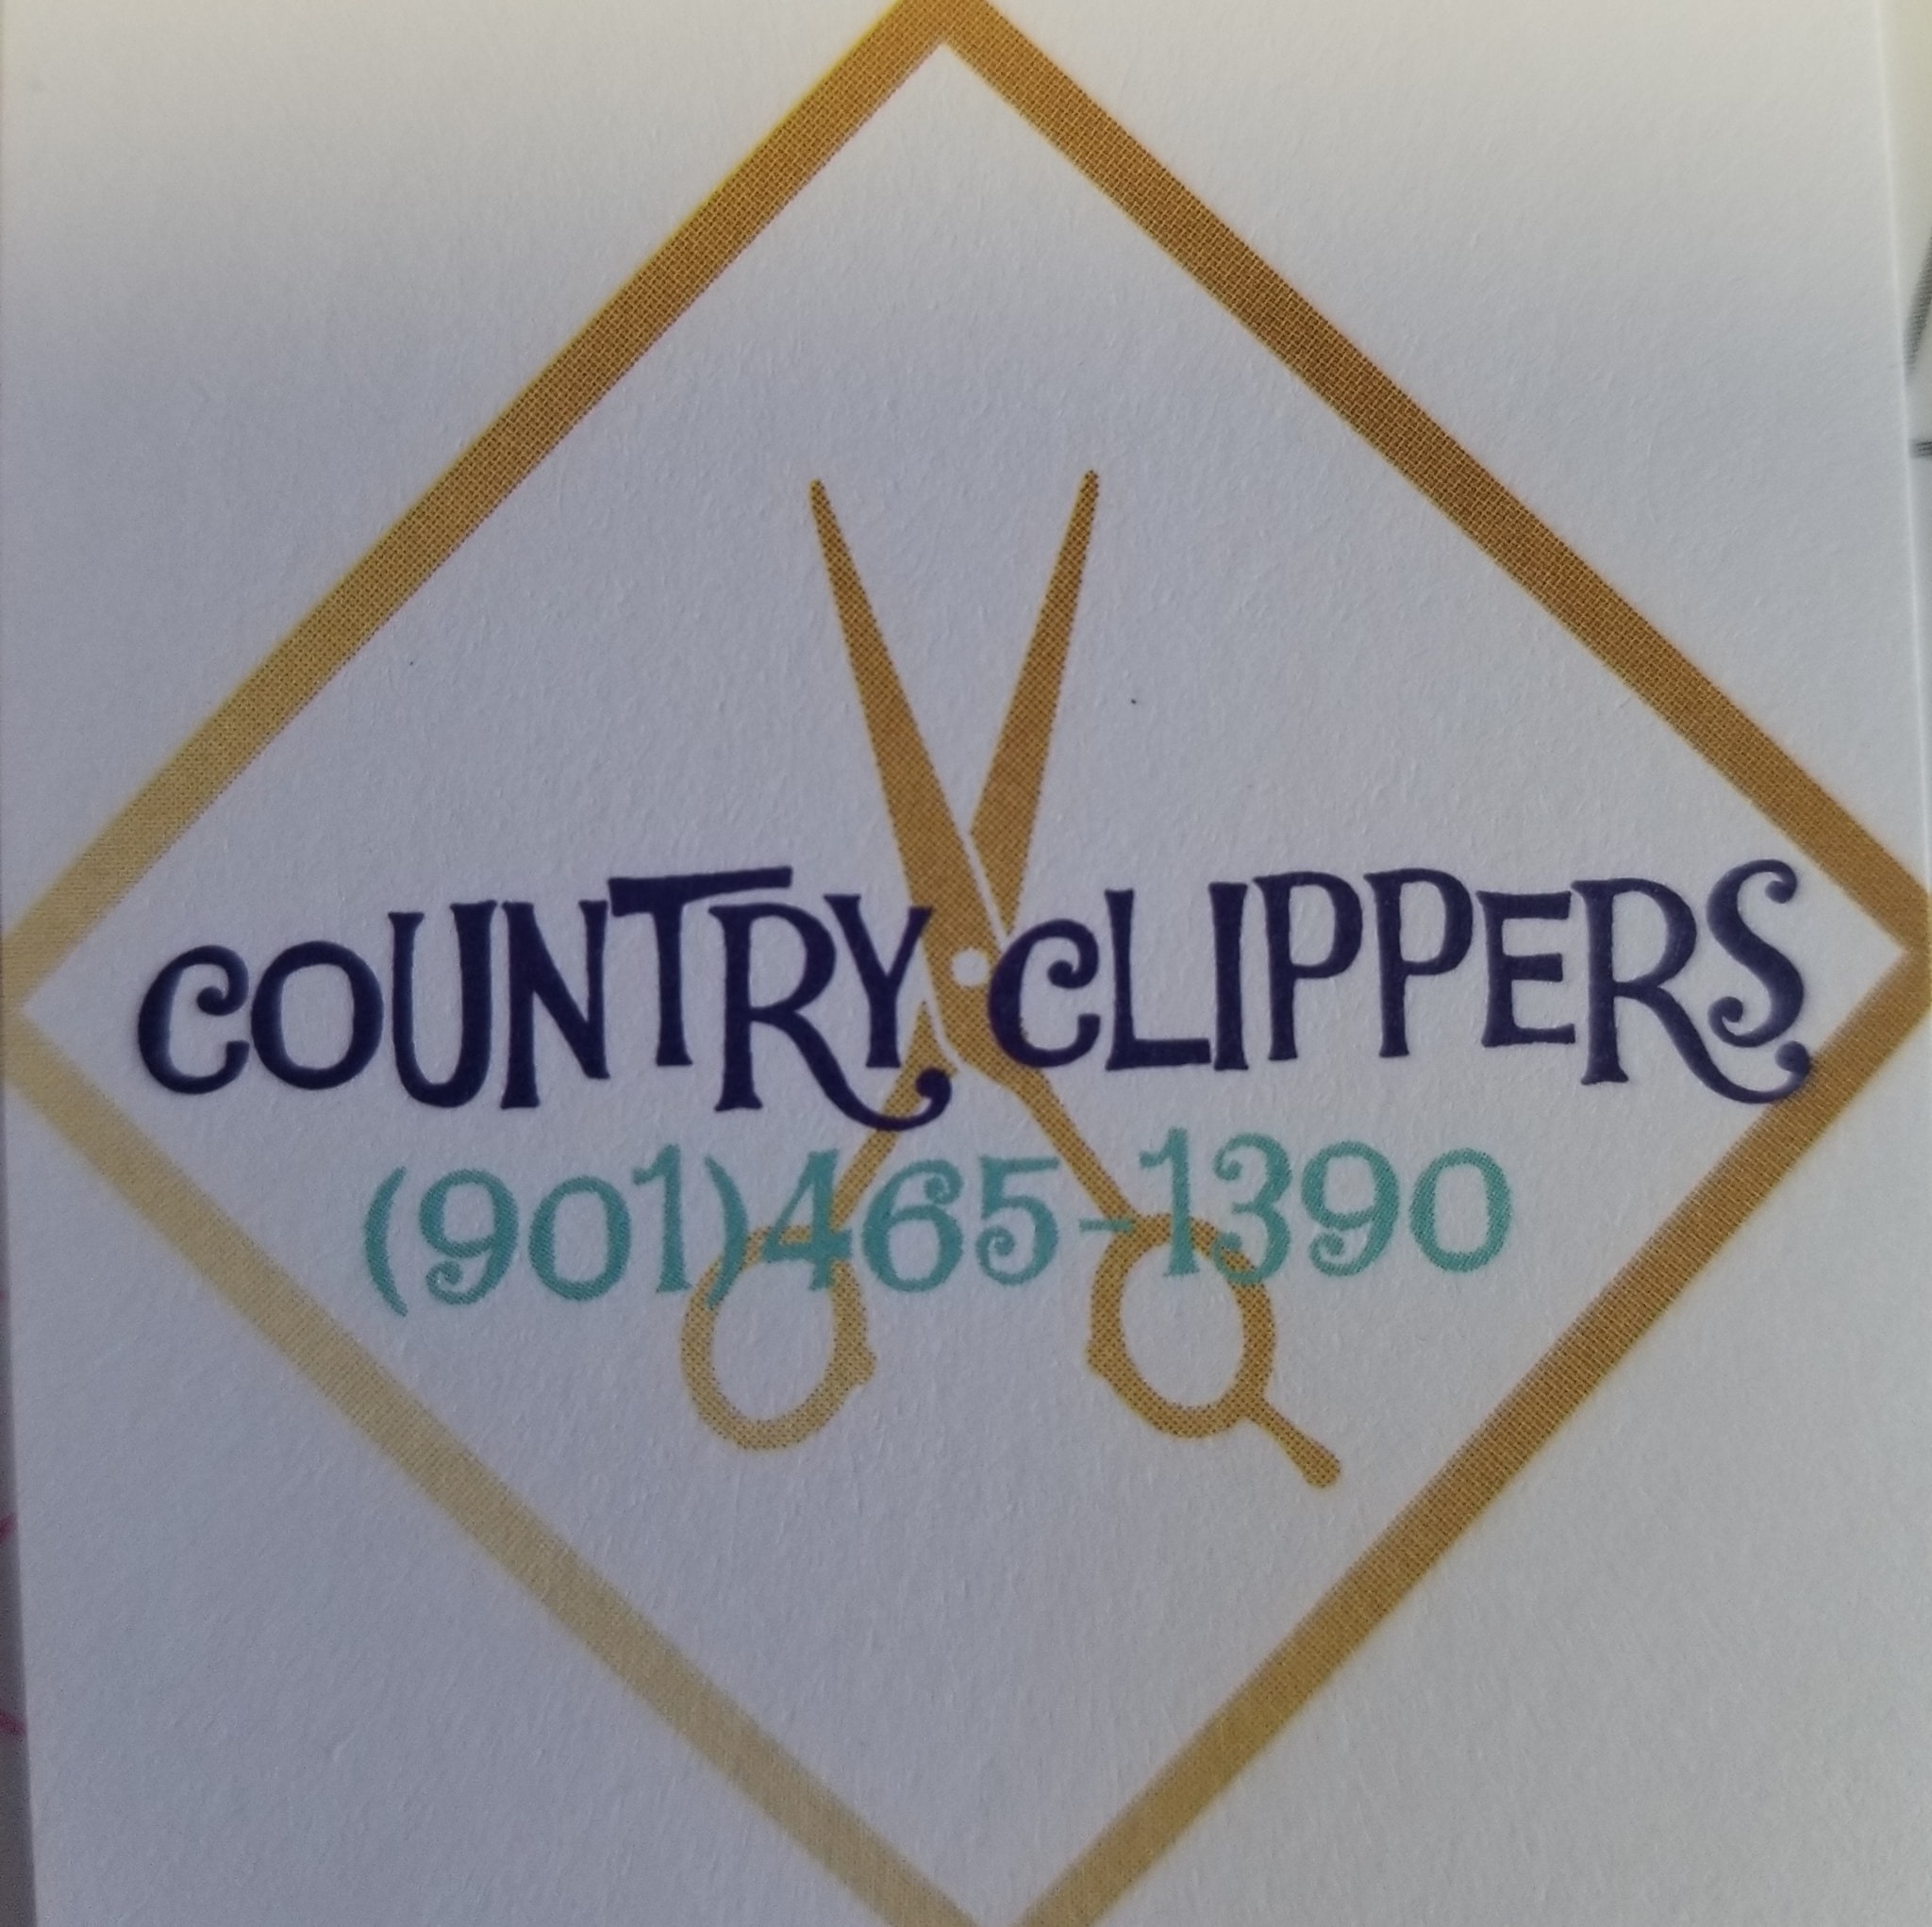 Country Clippers 7037 US-64, Oakland Tennessee 38060